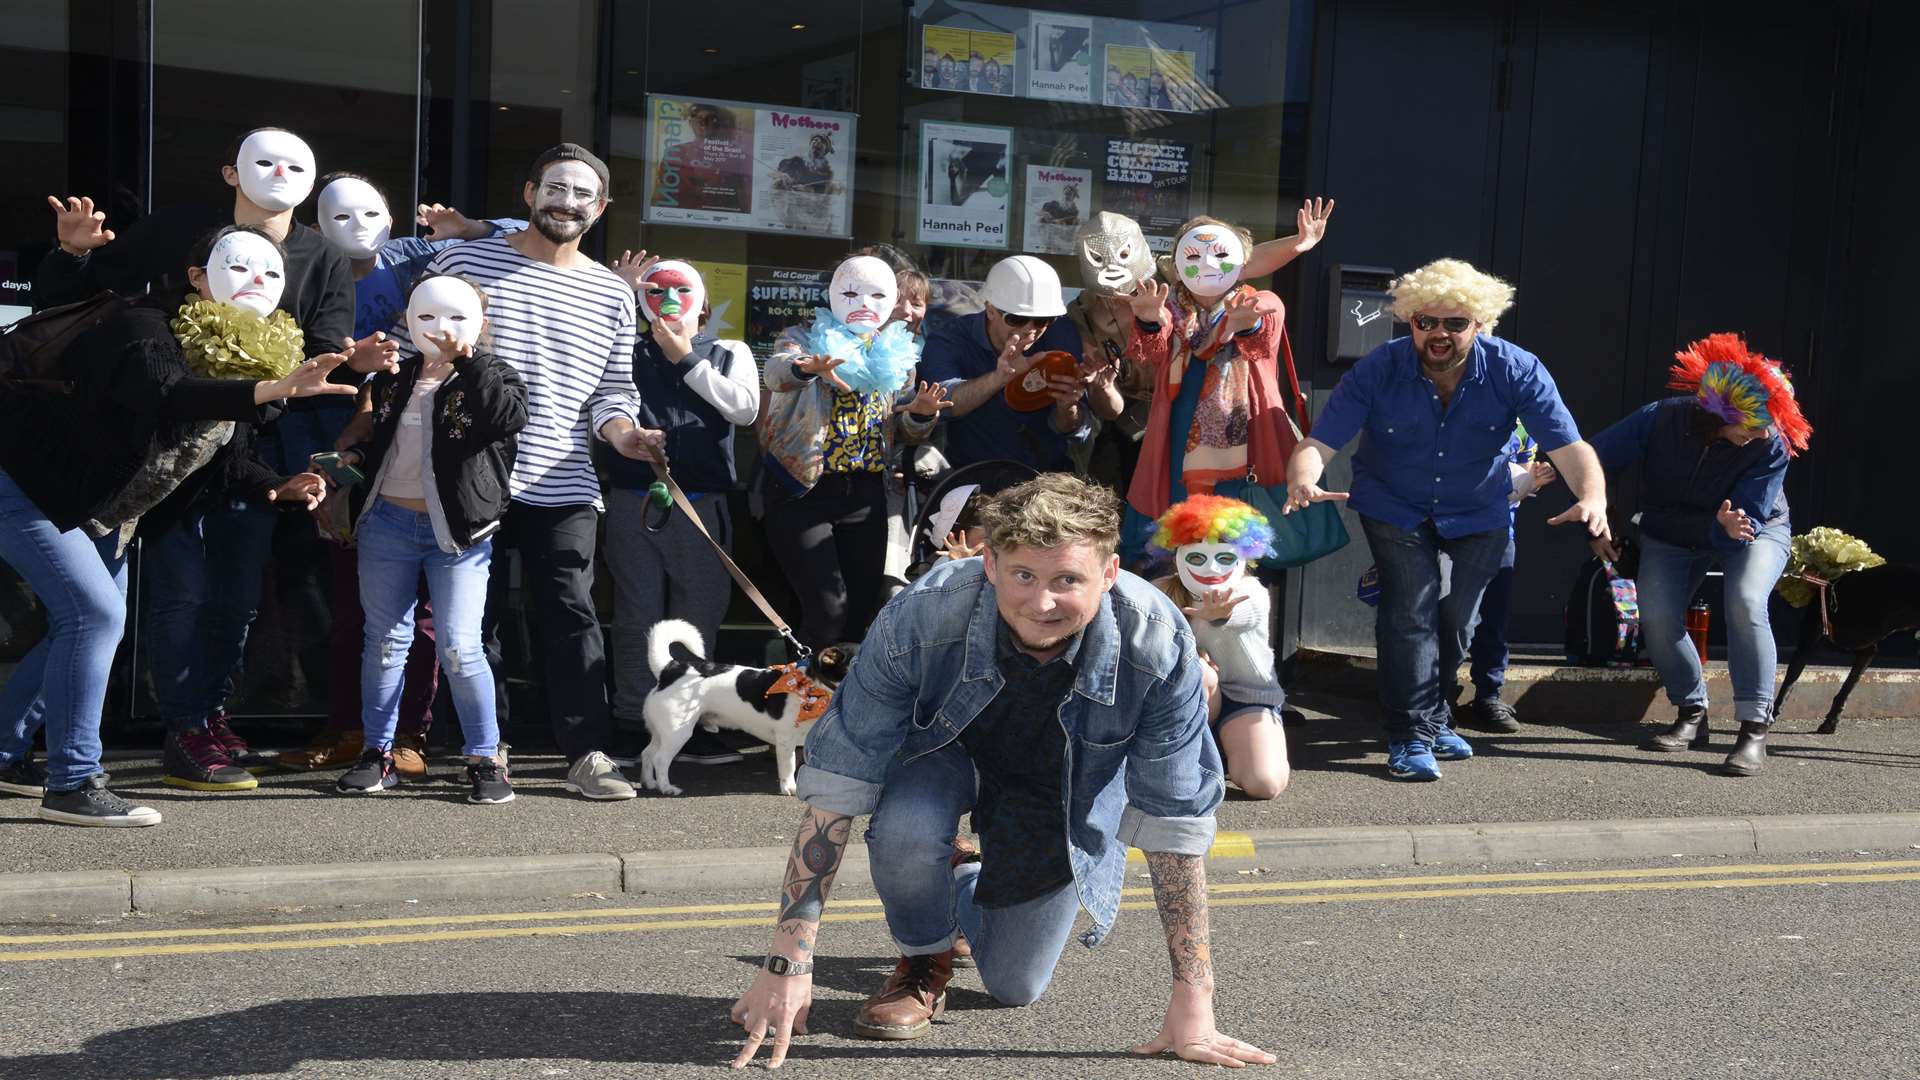 Performance artist Byron Vincent gets Noel Edmonds lookalikes and clowns to chase him Picture: Paul Amos